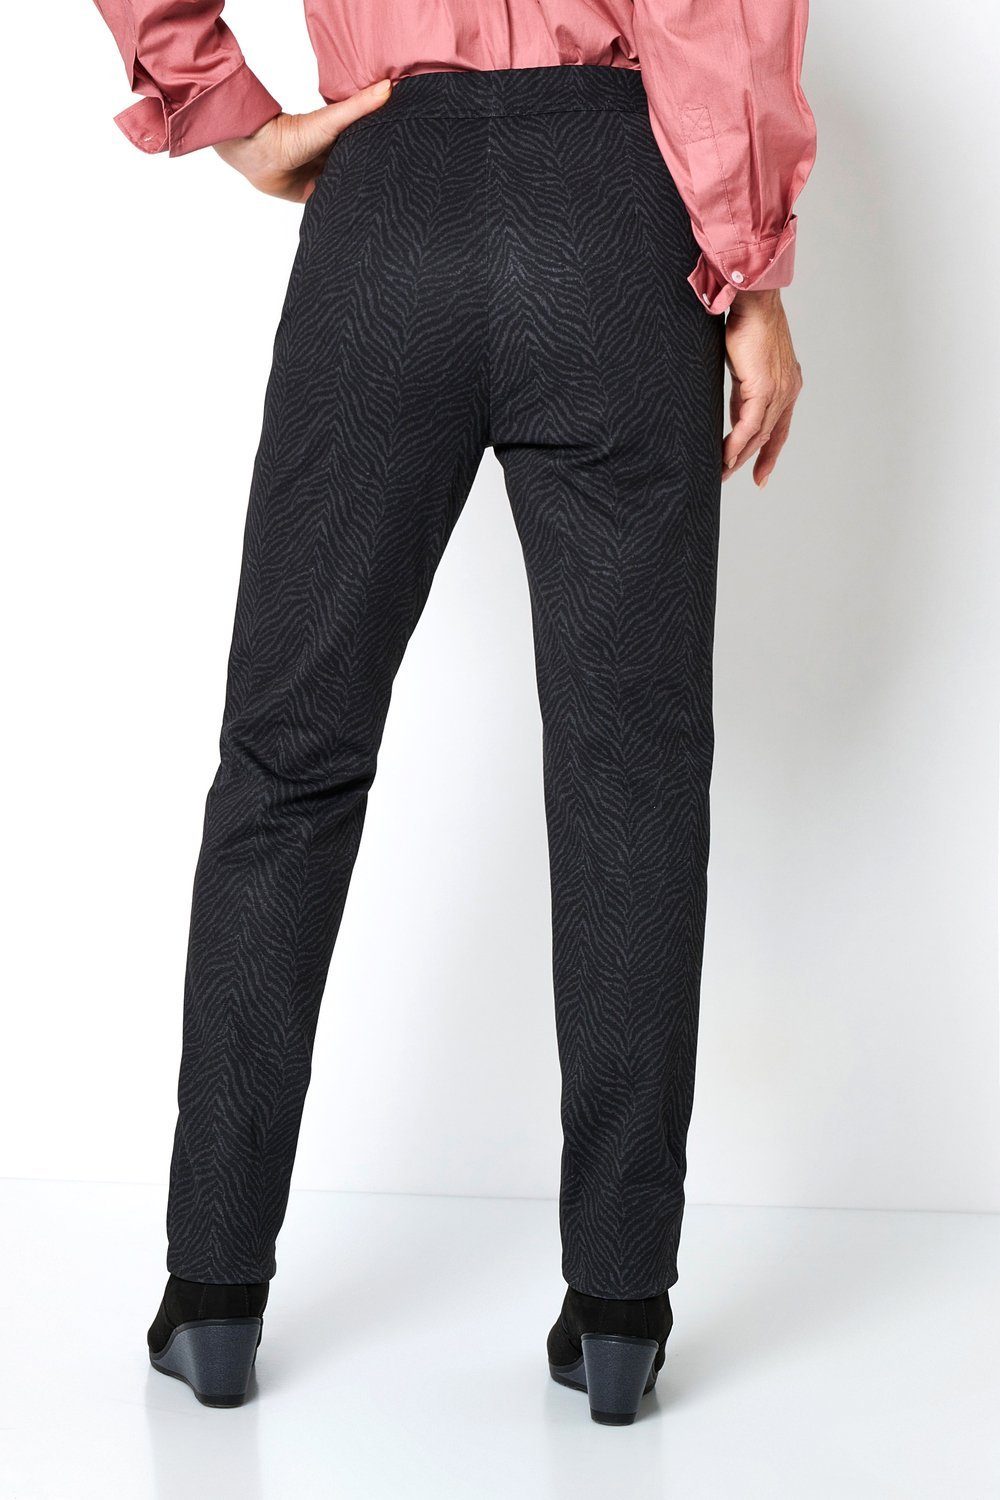 5-Pocket-Hose Relaxed TONI Relaxed Toni by